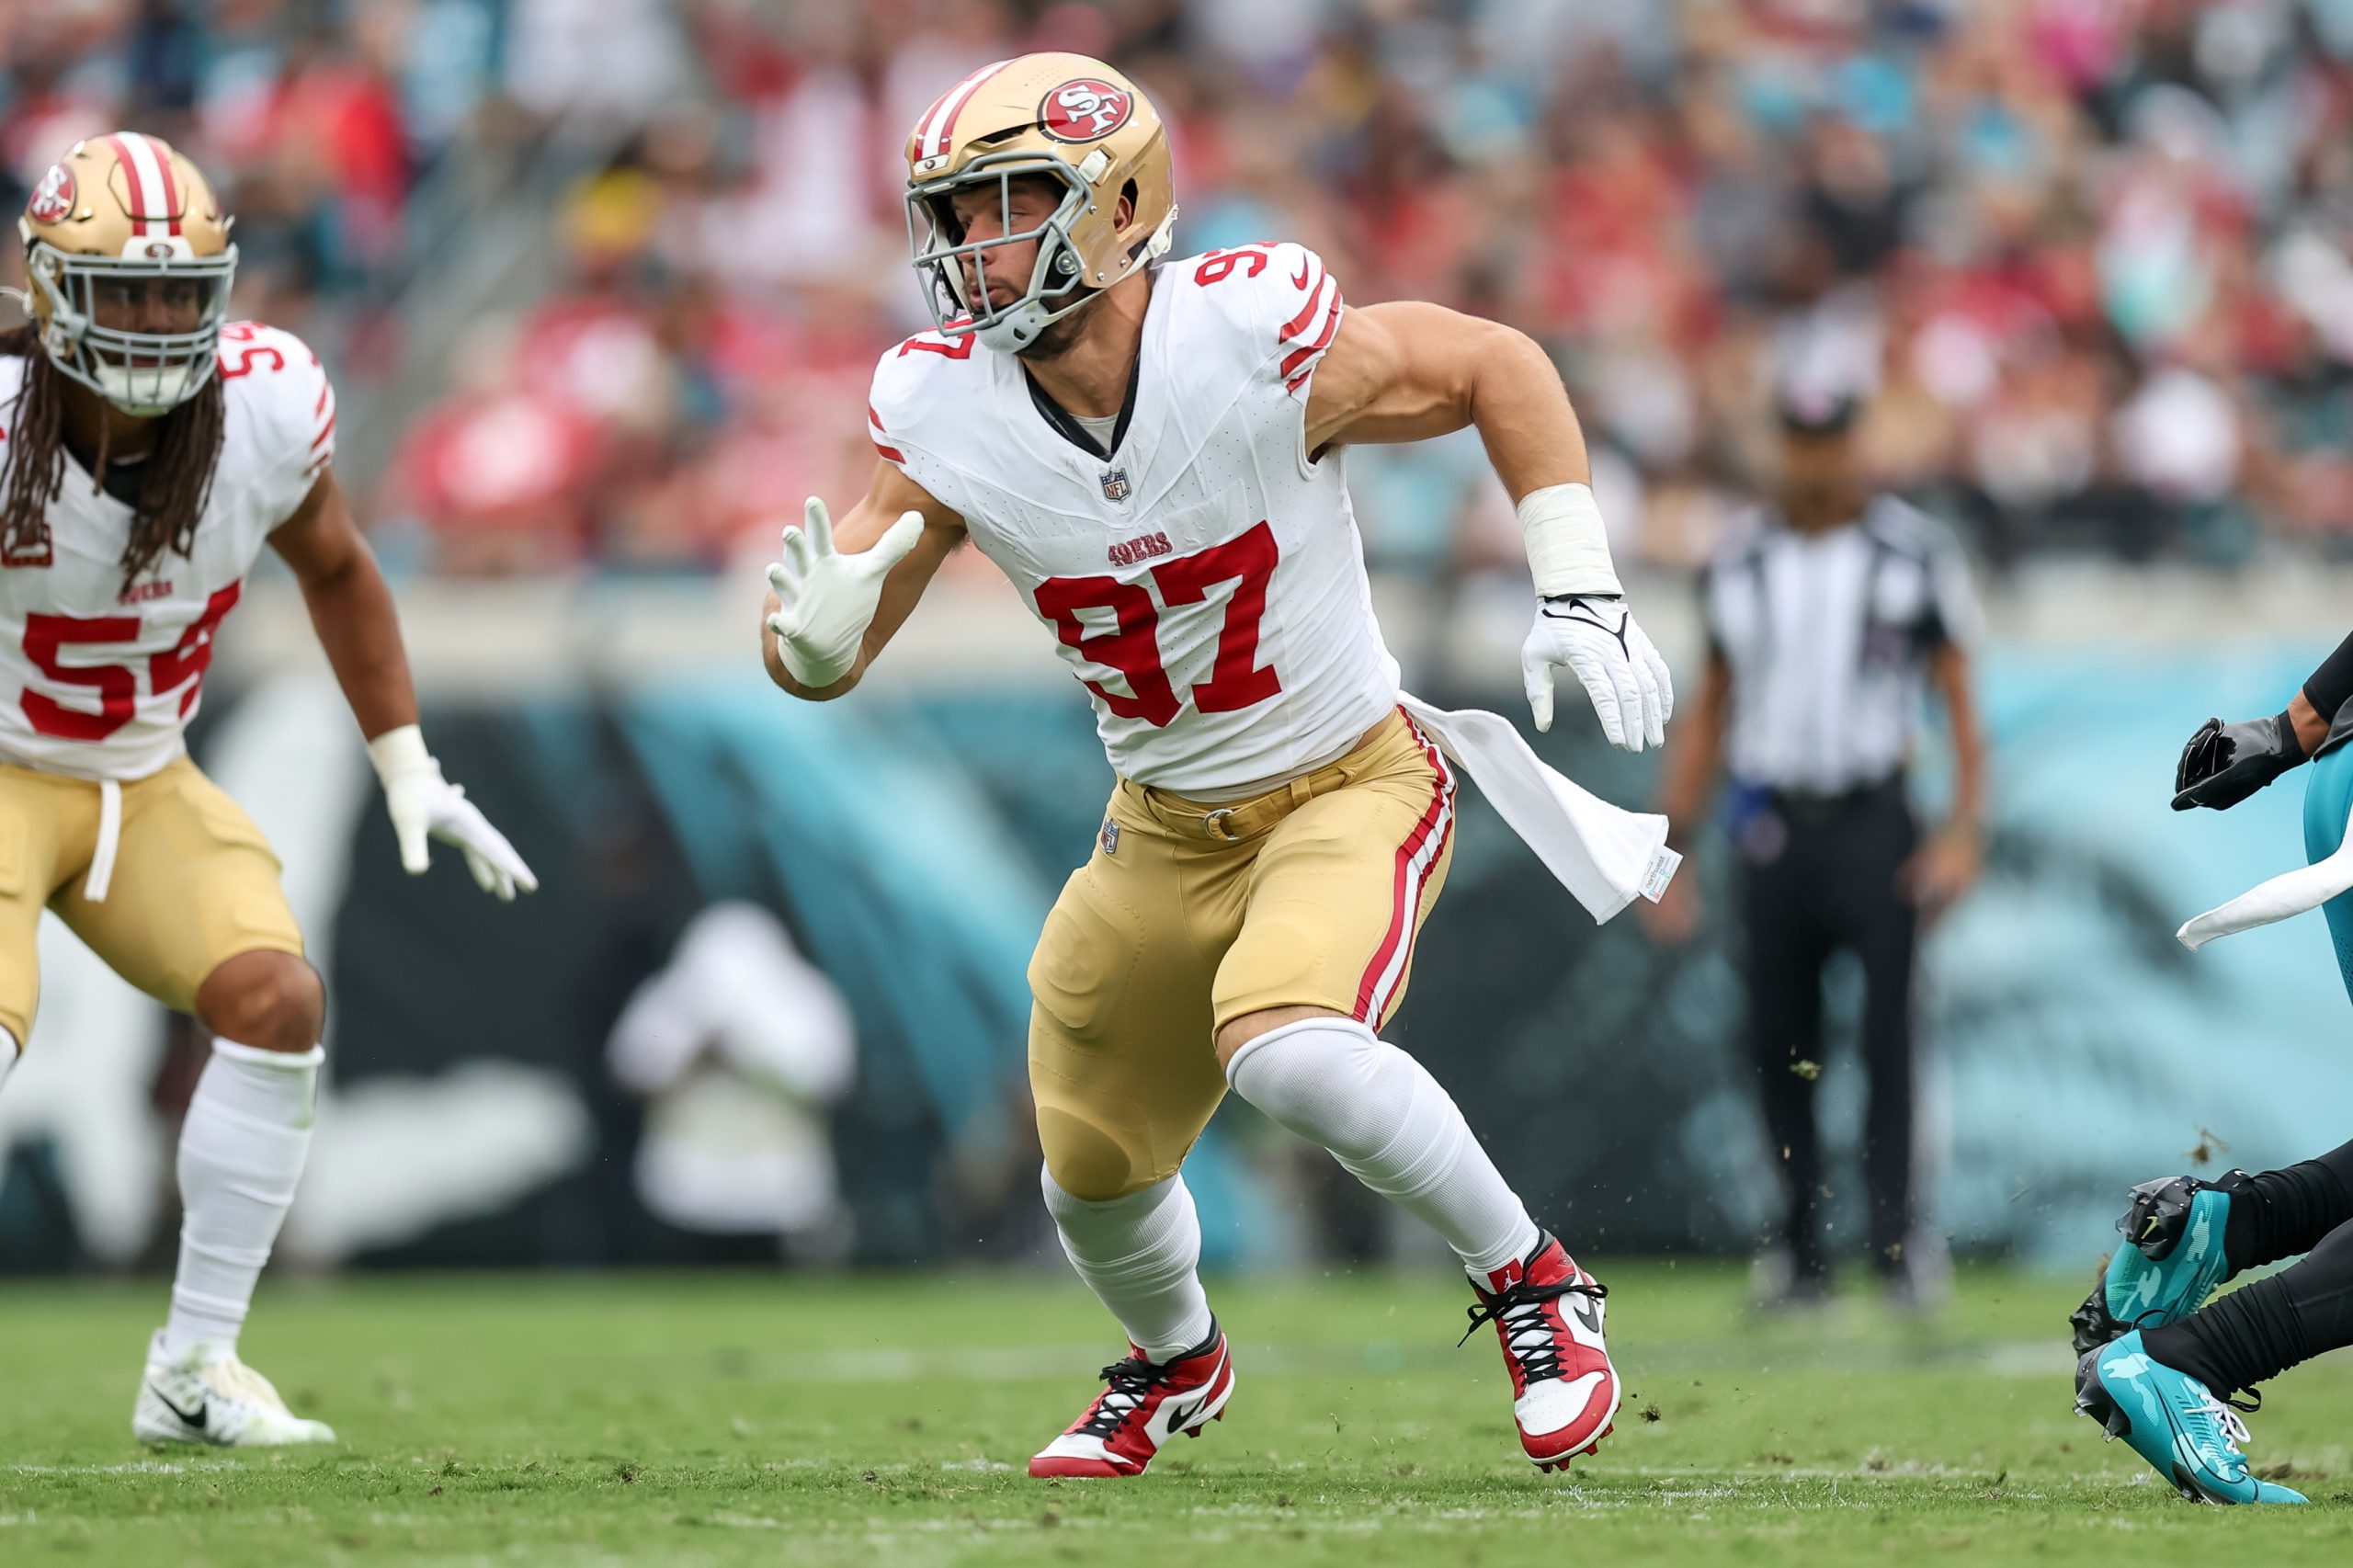 Nick Bosa #97 of the San Francisco 49ers against the Jacksonville Jaguars during the game at EverBa...